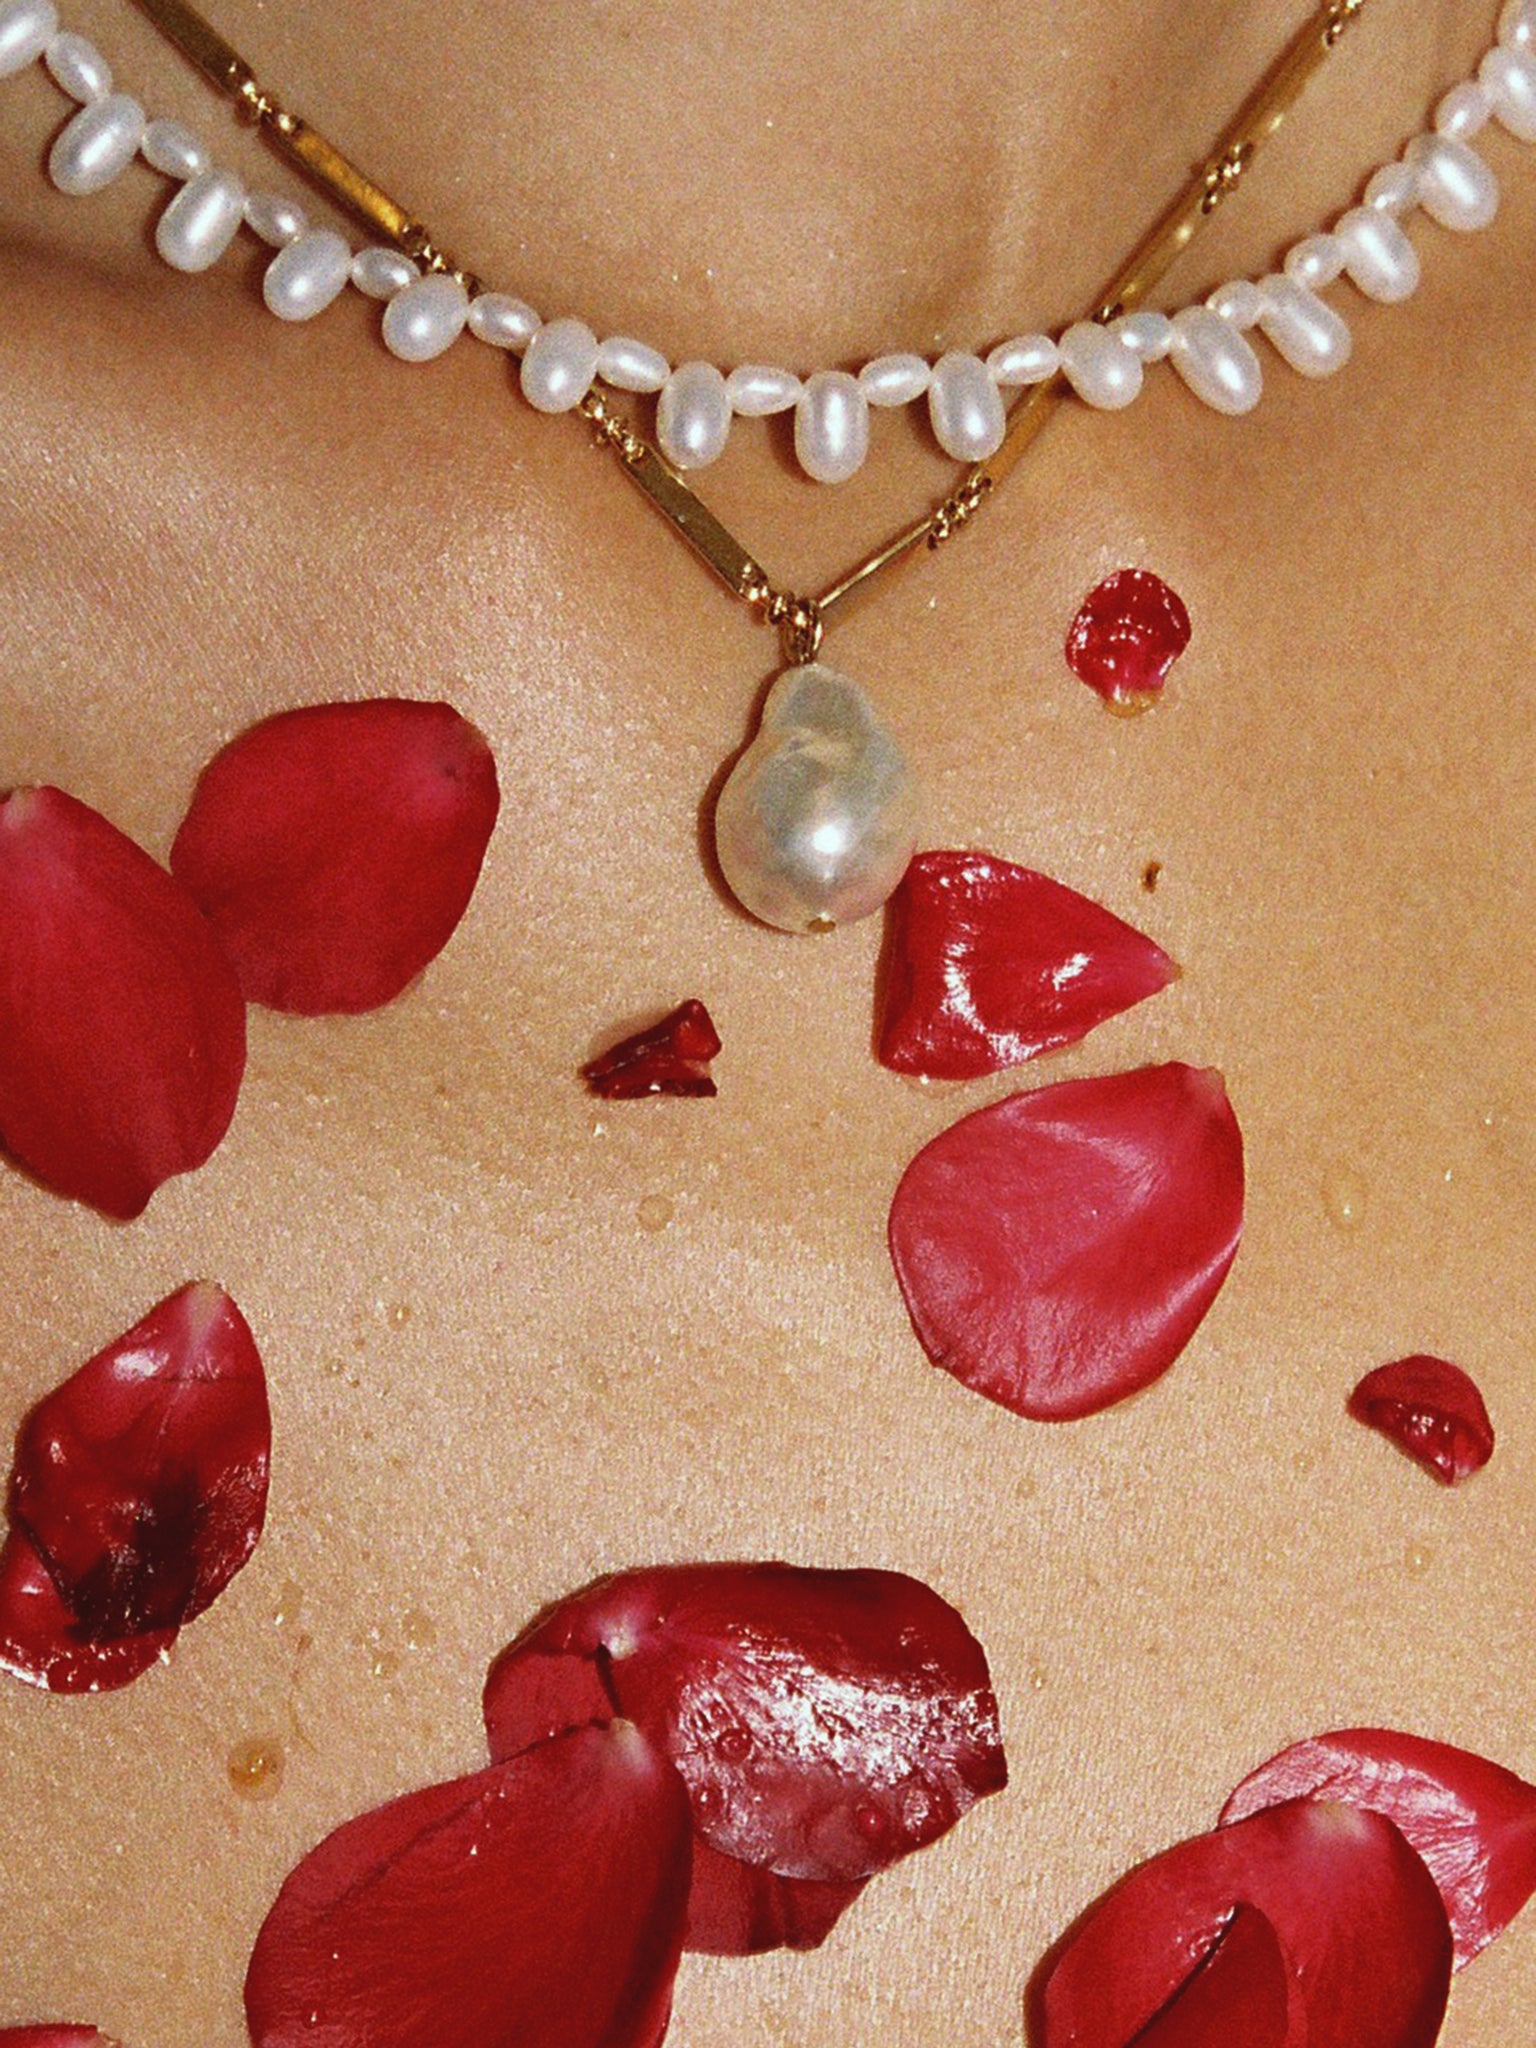 The Angel Pearl Necklace